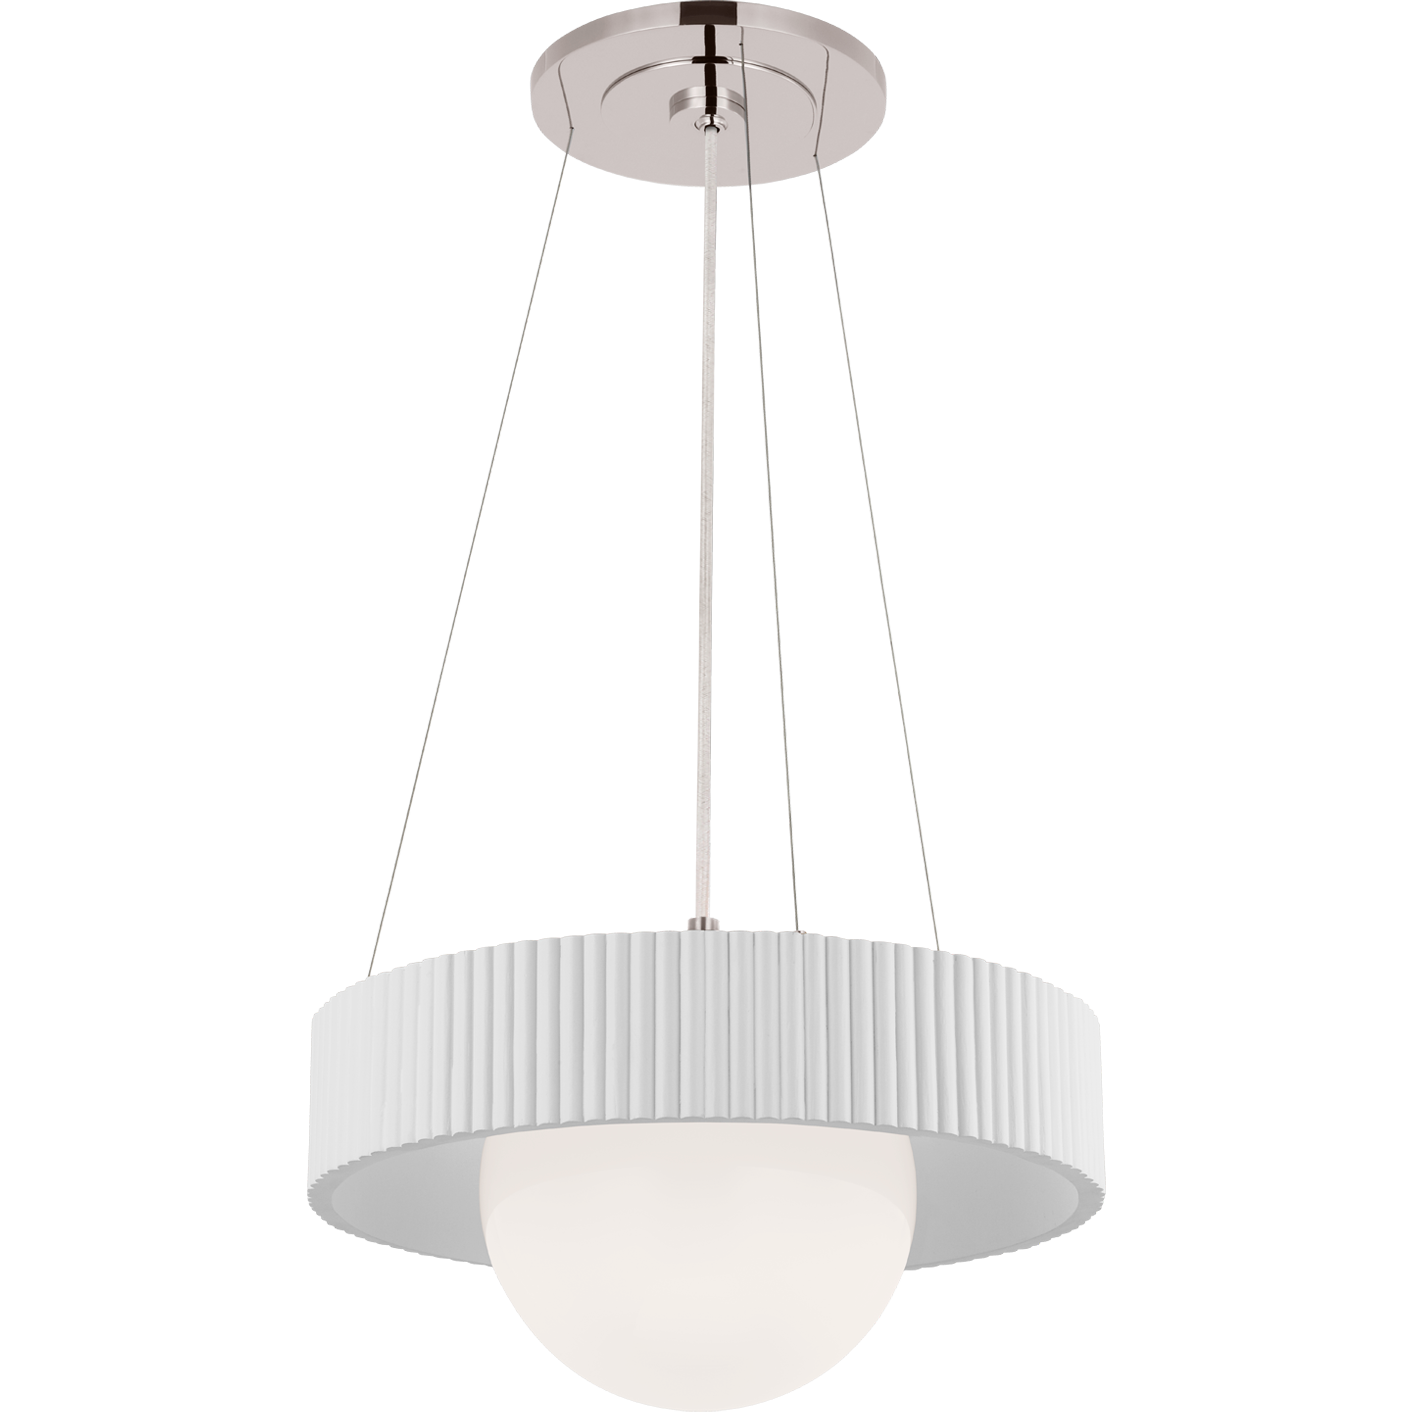 Arena 18" Ring and Globe Chandelier